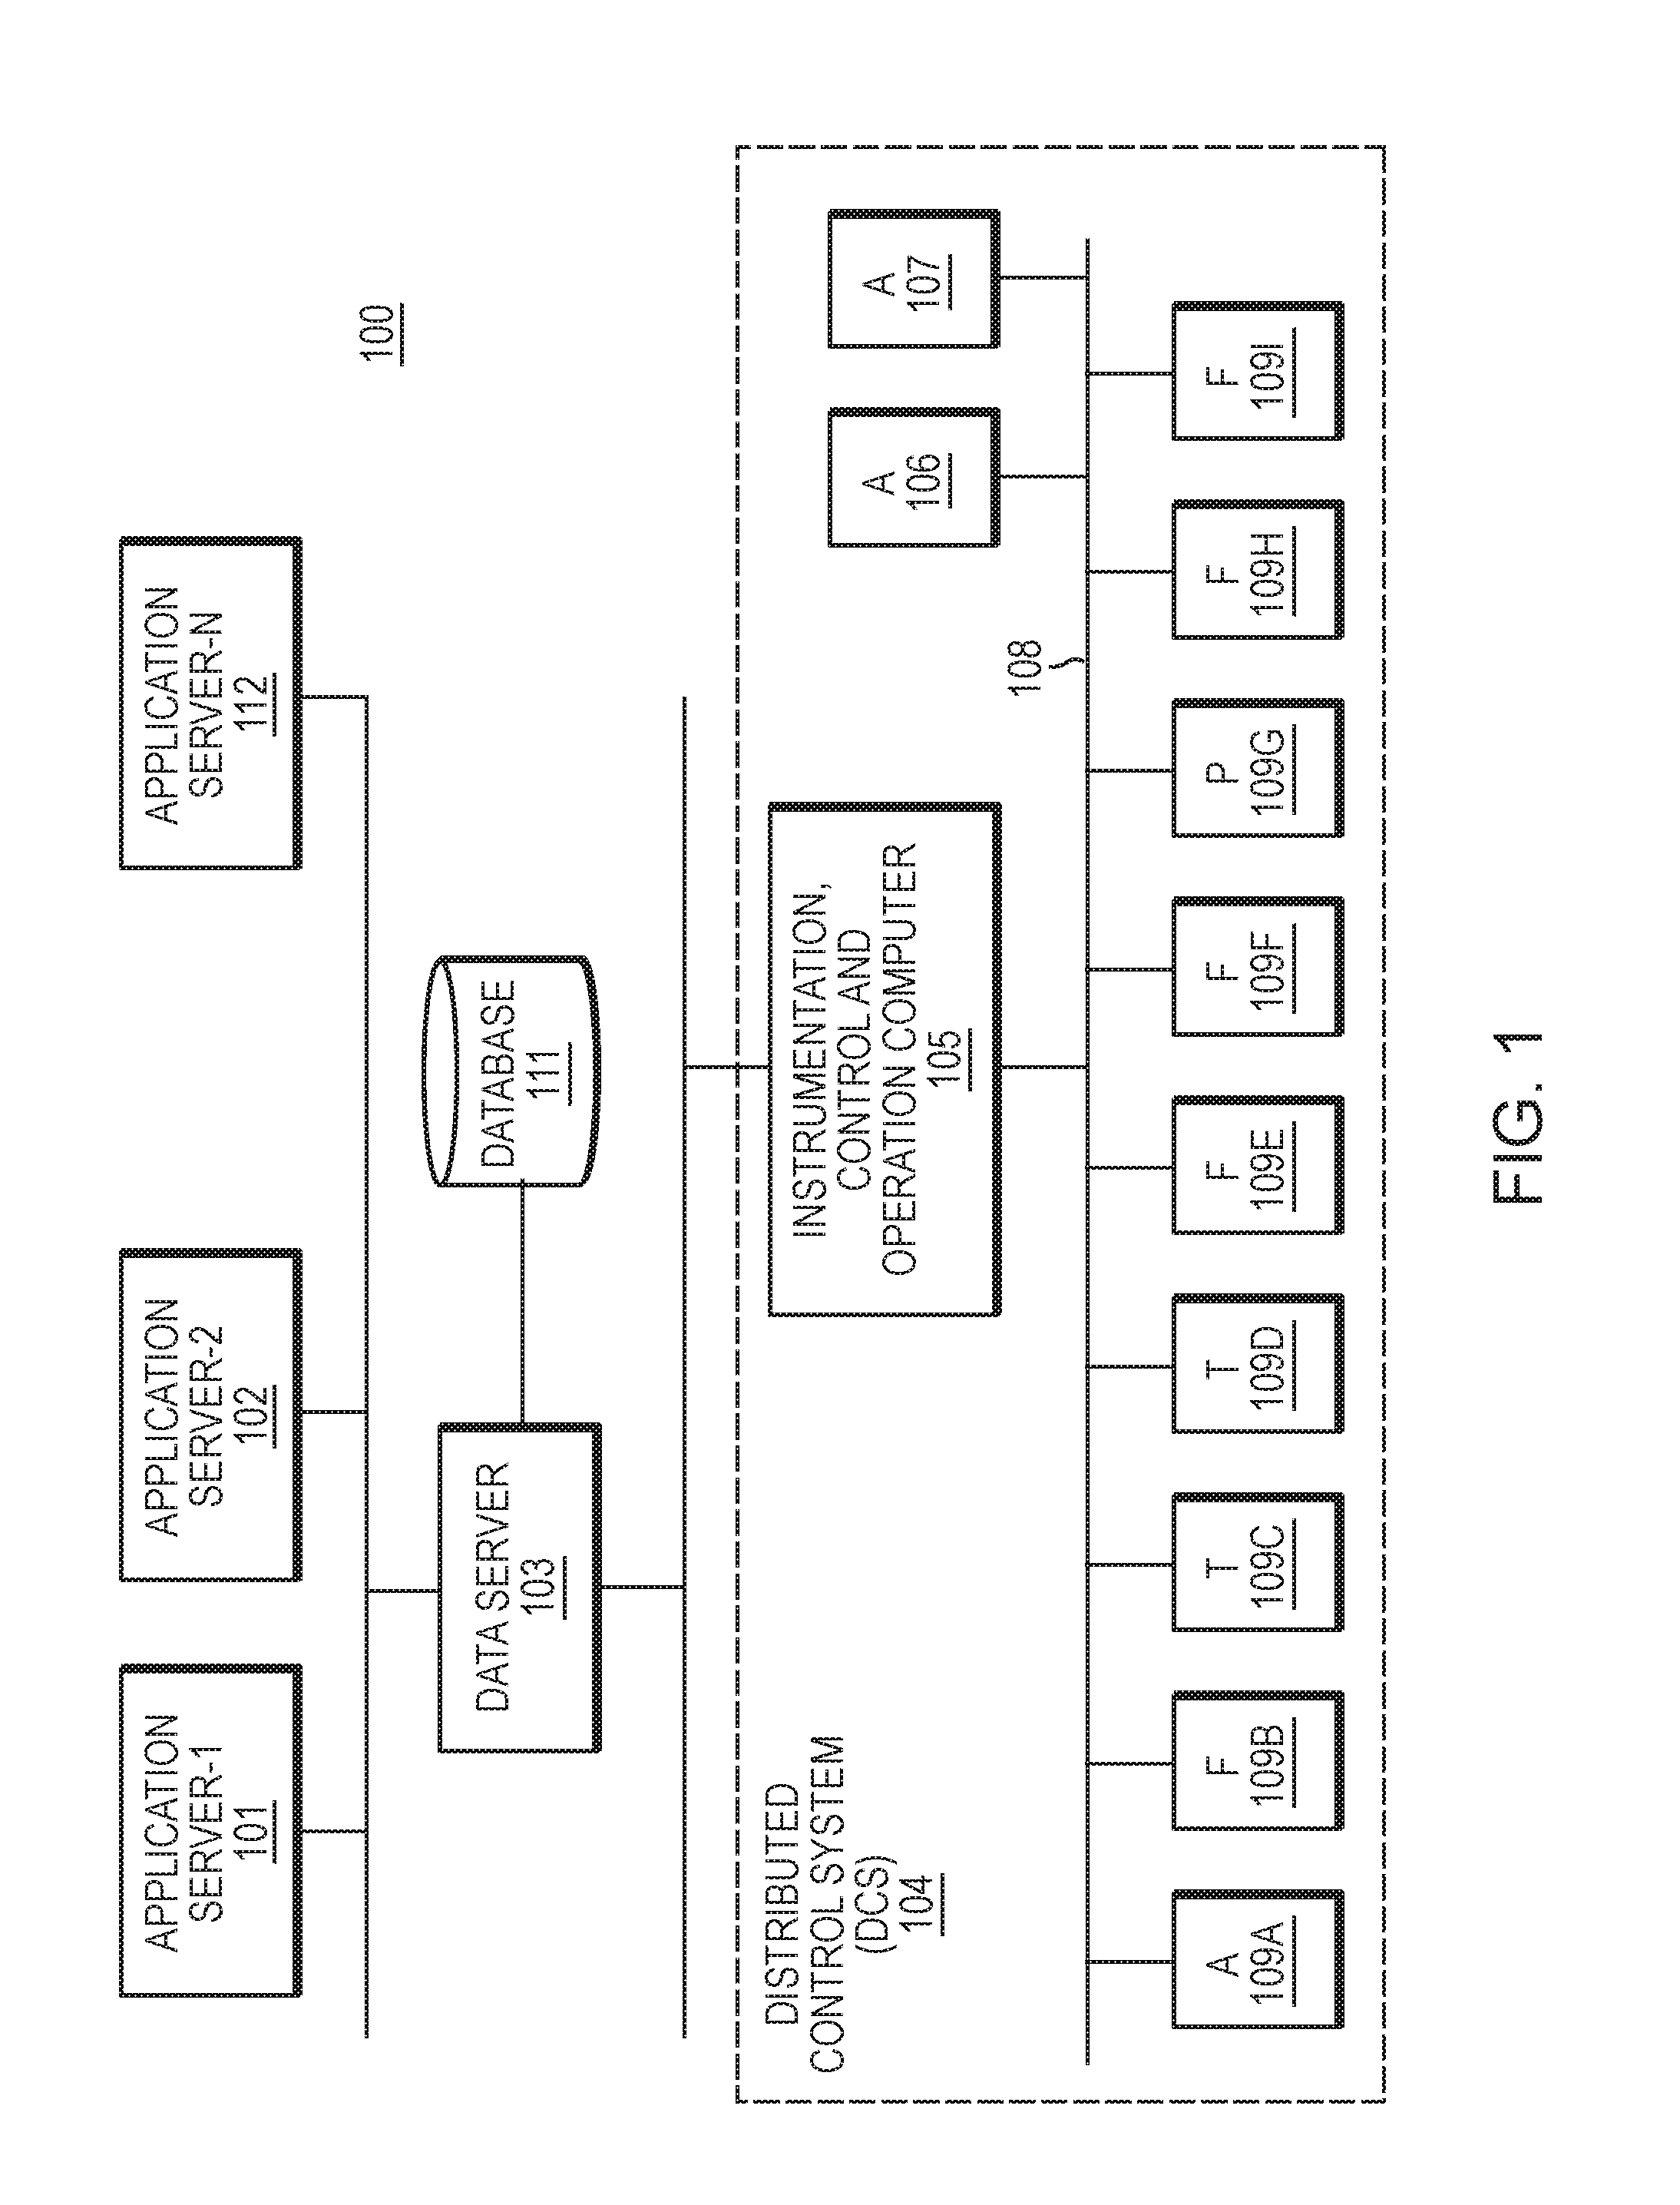 Computer System And Method For Causality Analysis Using Hybrid First-Principles And Inferential Model